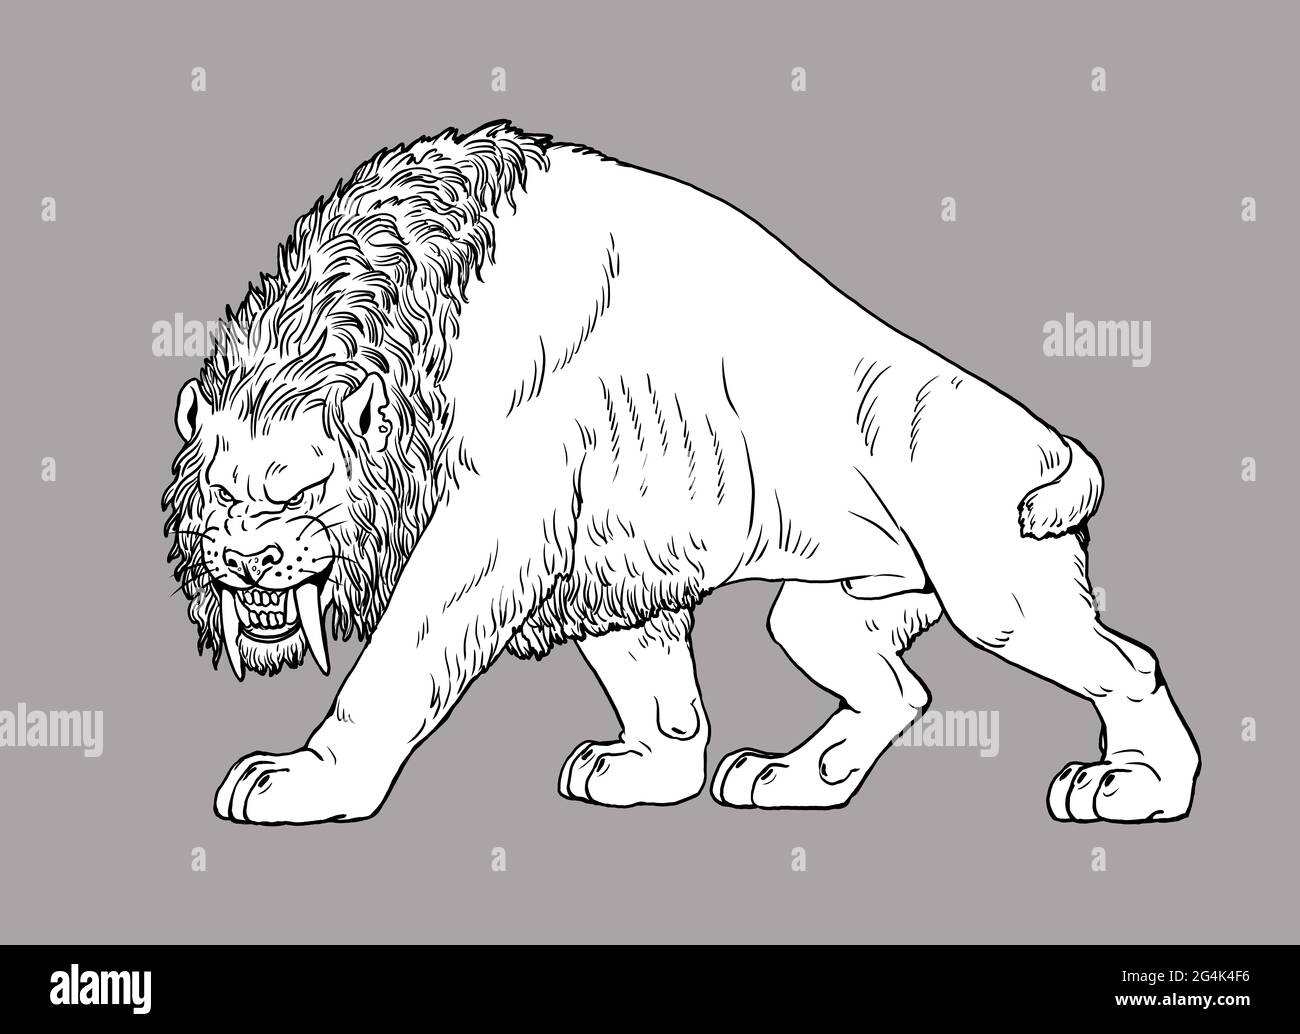 Saber tooth cat on the hunt. Animals illustration. Saber-toothed cat attack. Coloring book. Stock Photo